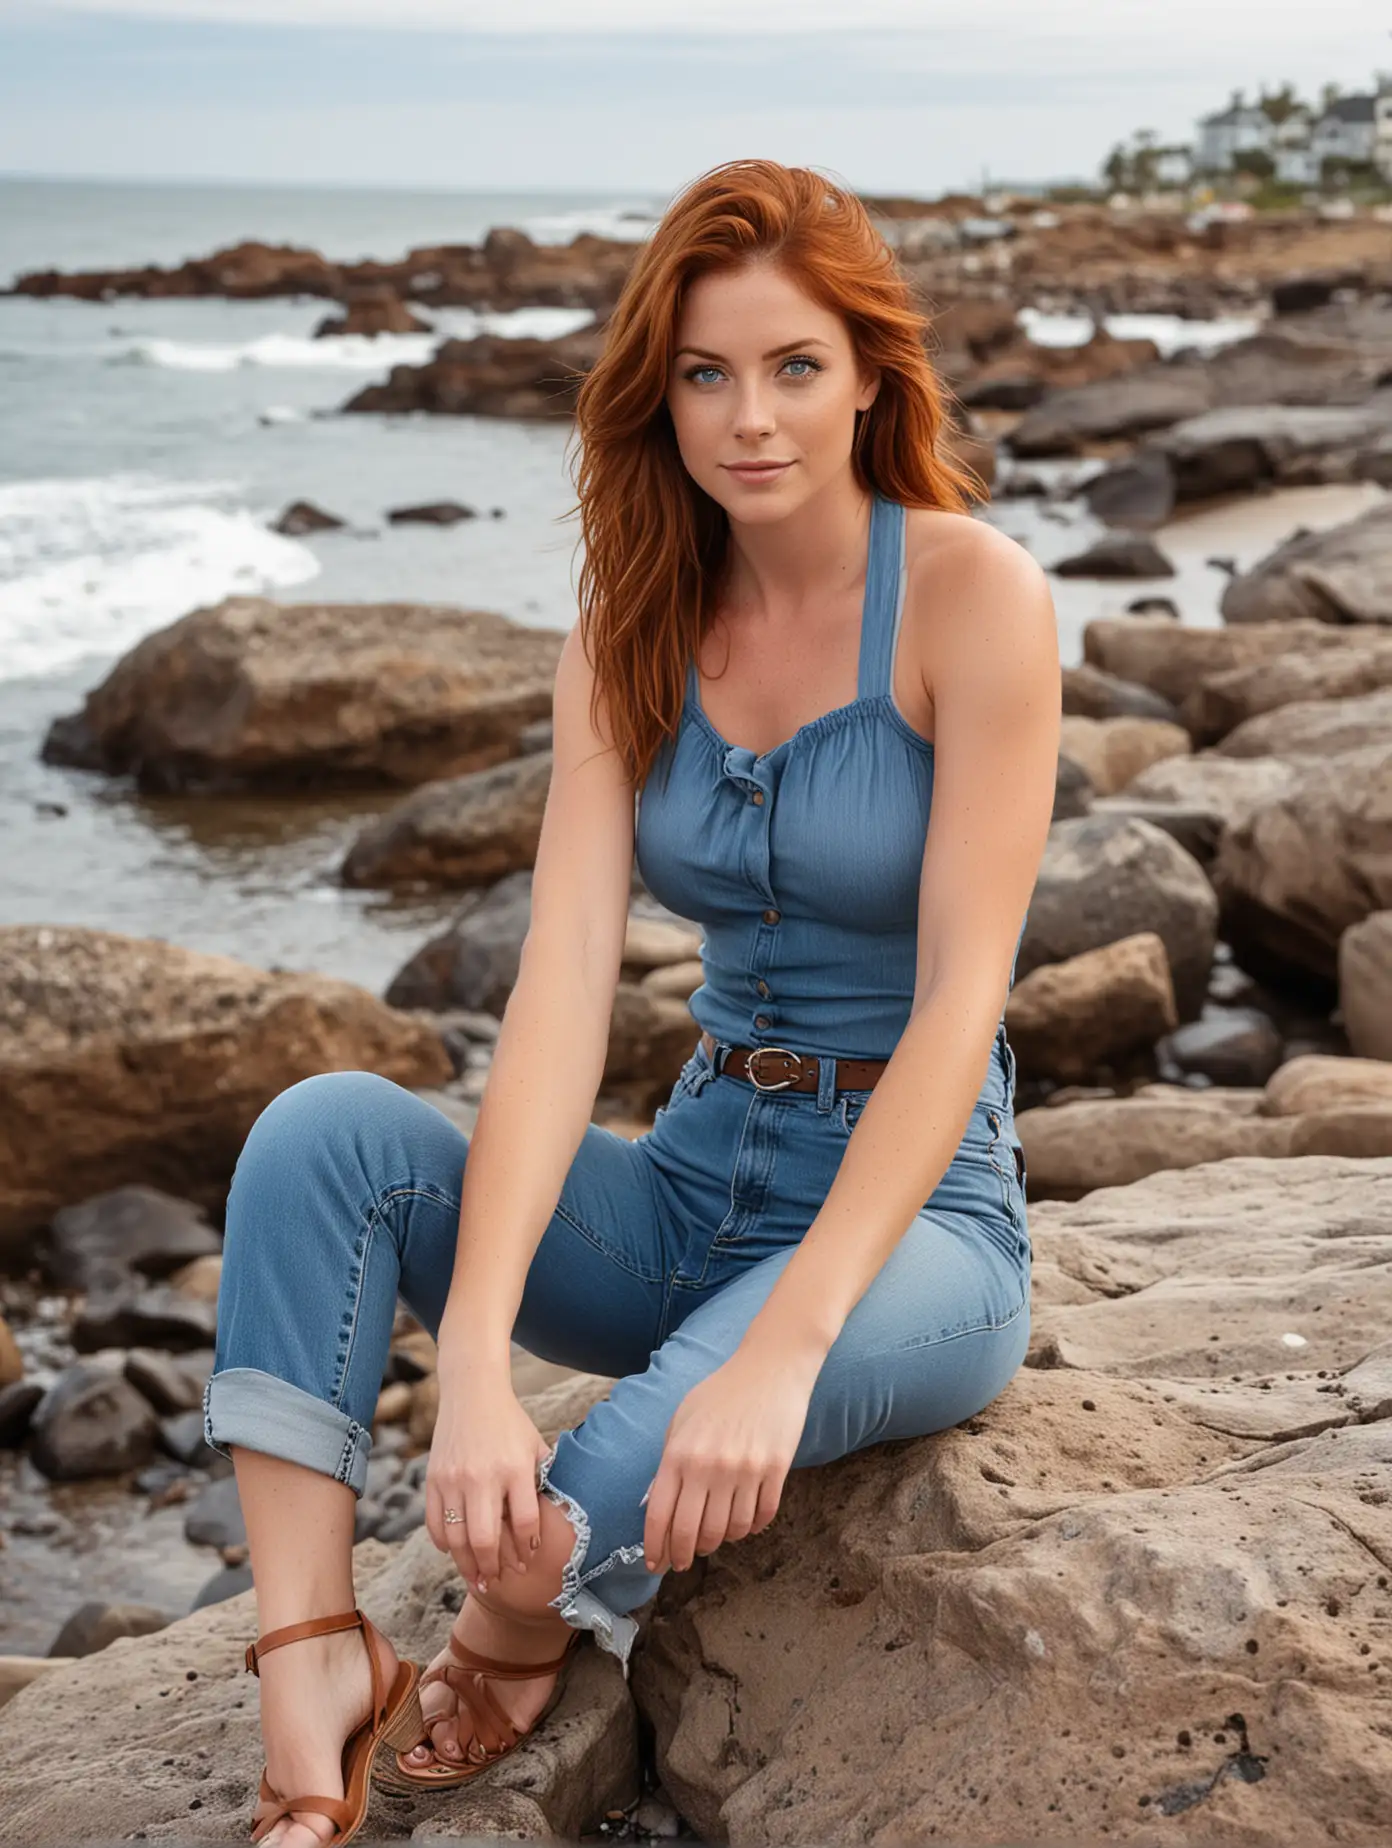 29 year old woman,auburn hair ,blue eyes,jeans,halter top,sitting on rock,on beach front ,full figure,low heeled shoes